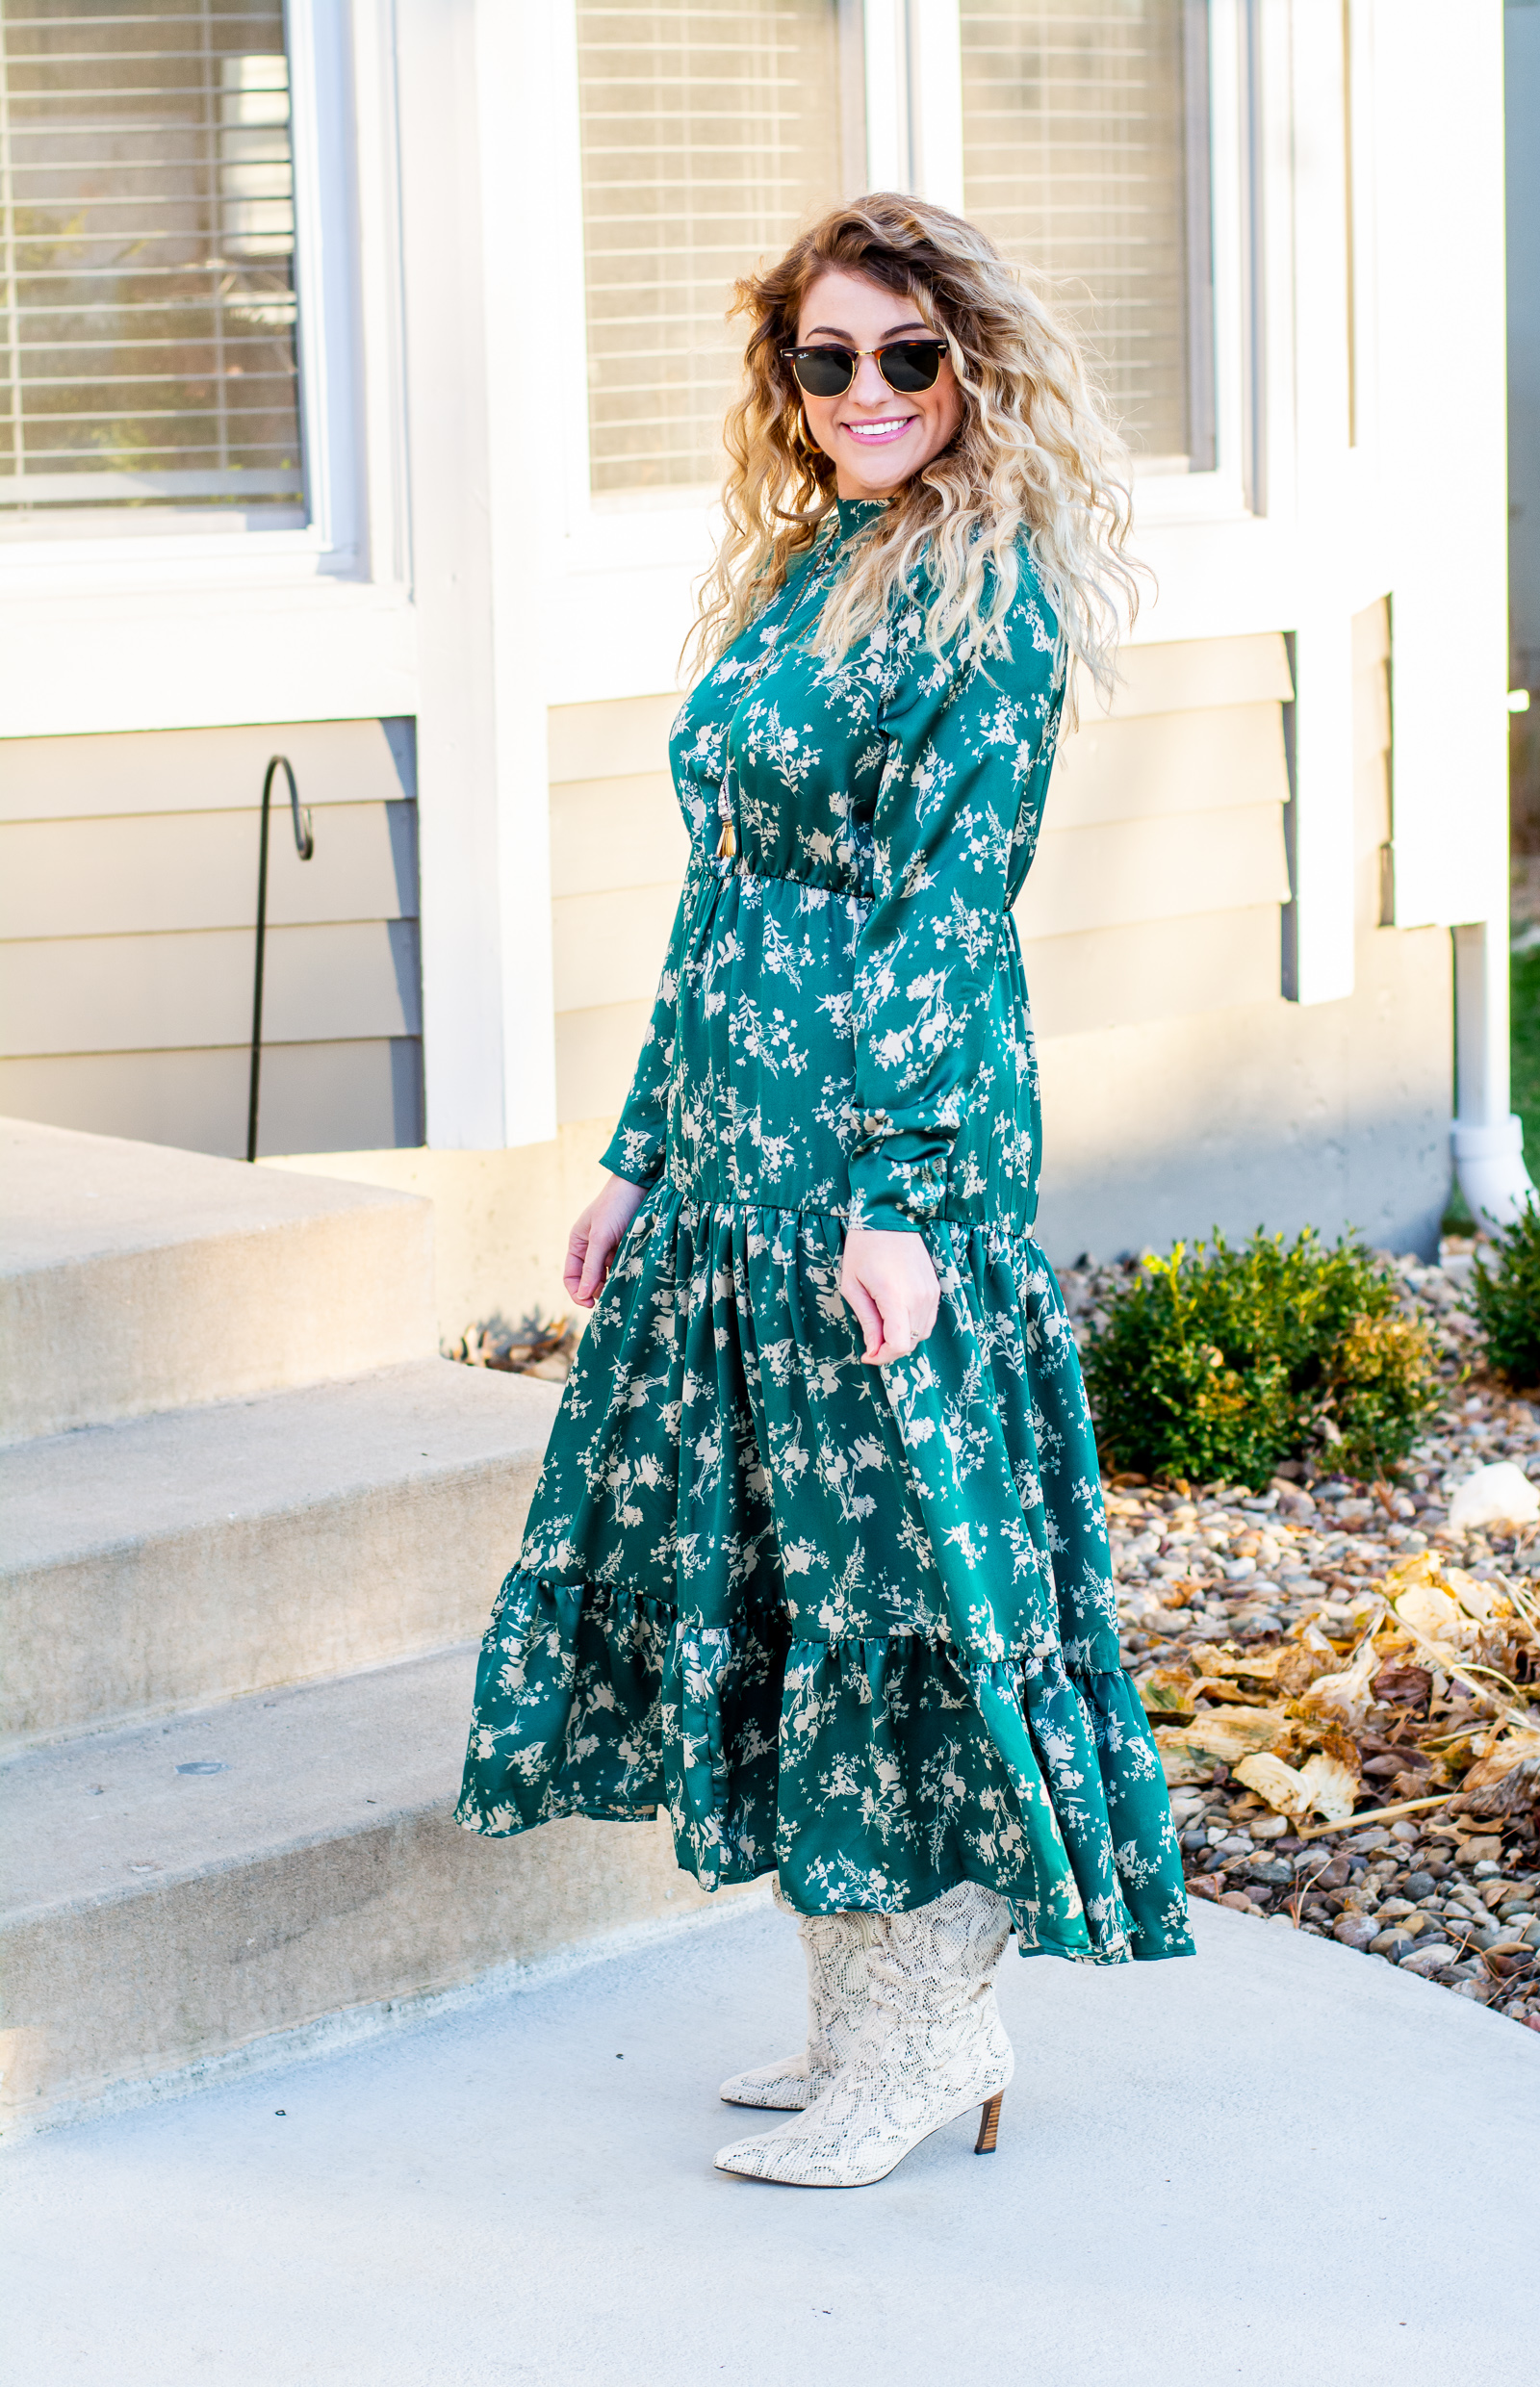 Holiday Outfit Idea: Green Satin Prairie Dress + Snakeskin Boots. | LSR